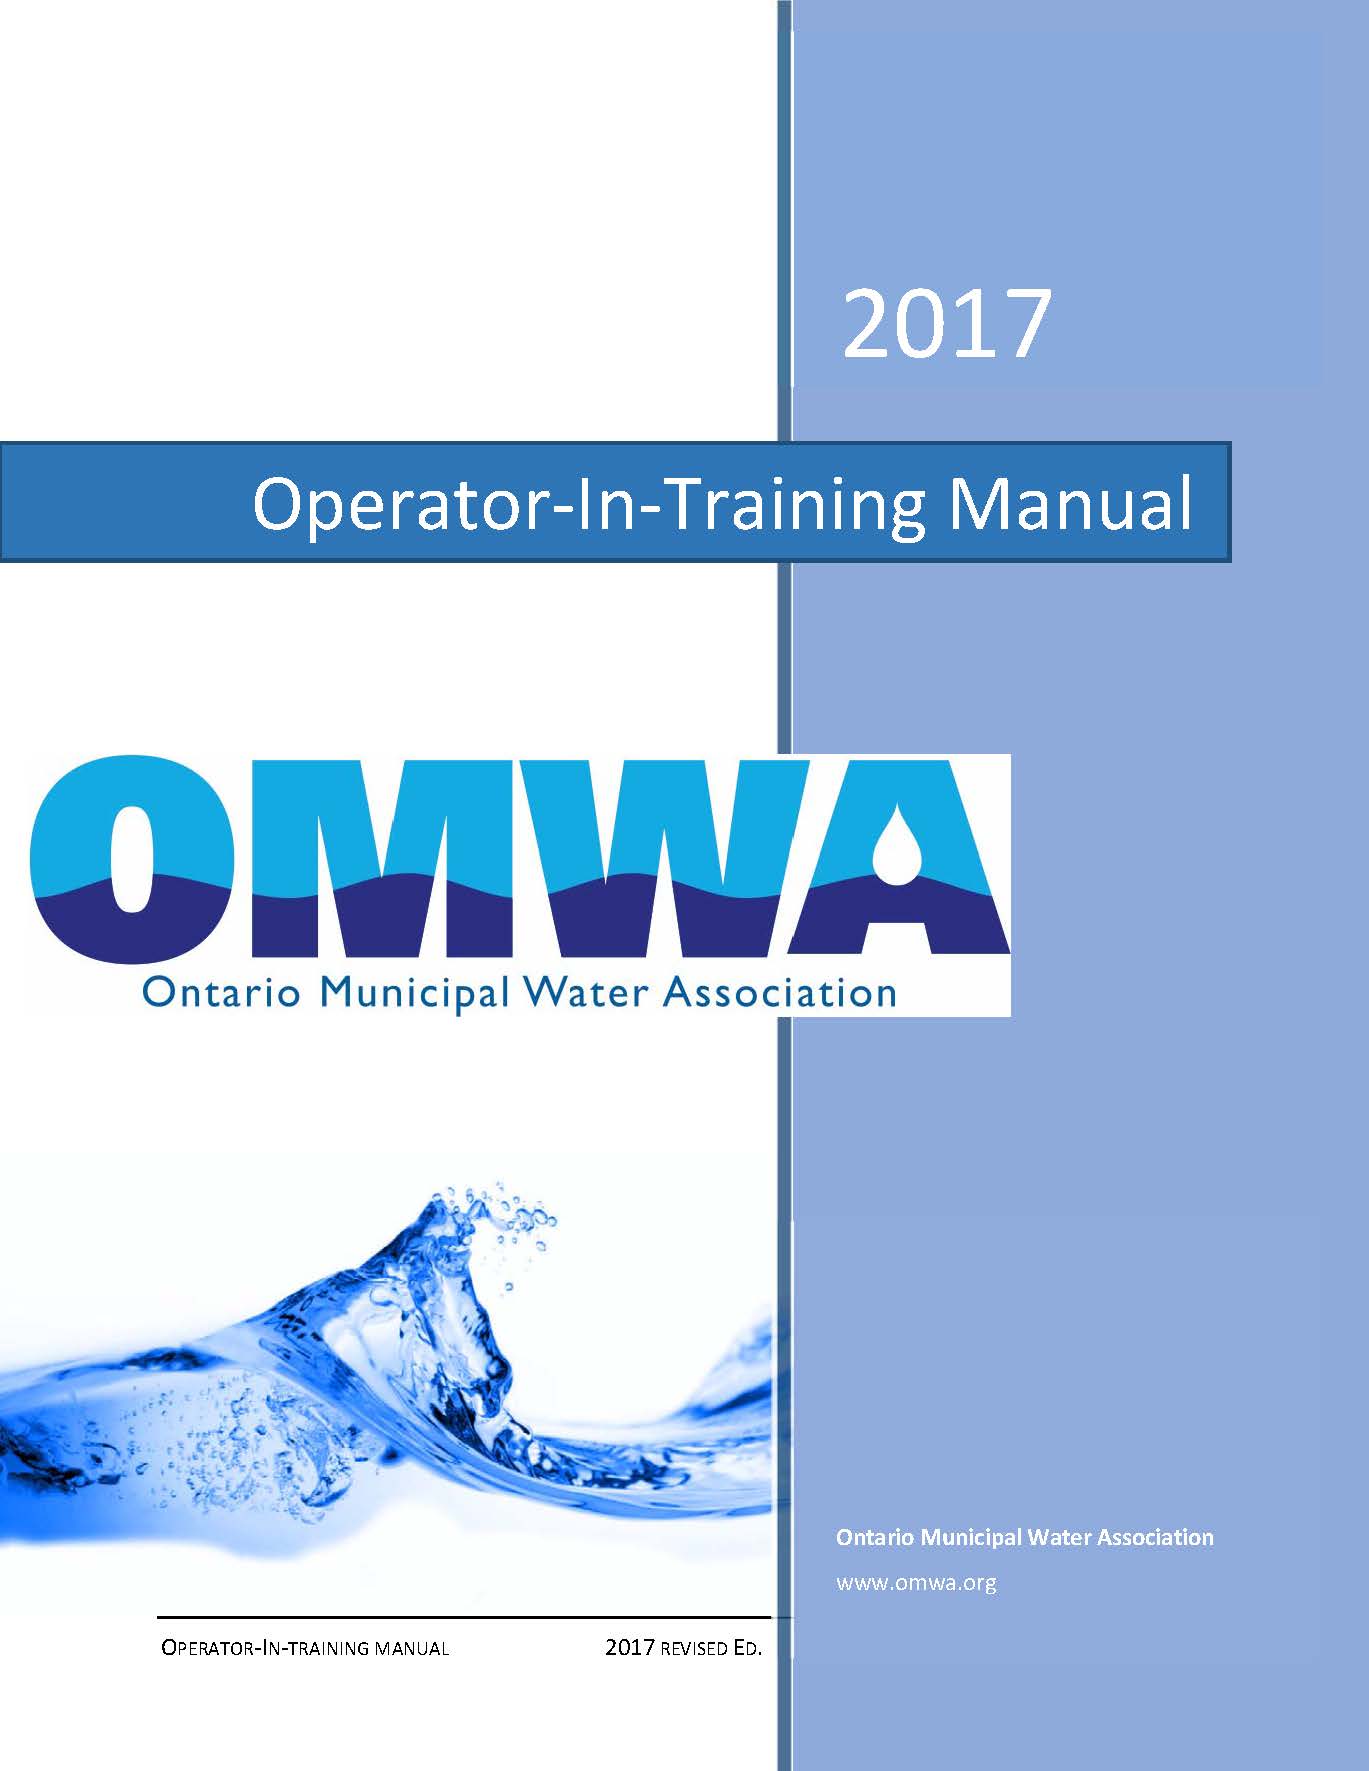 Revised OIT manual